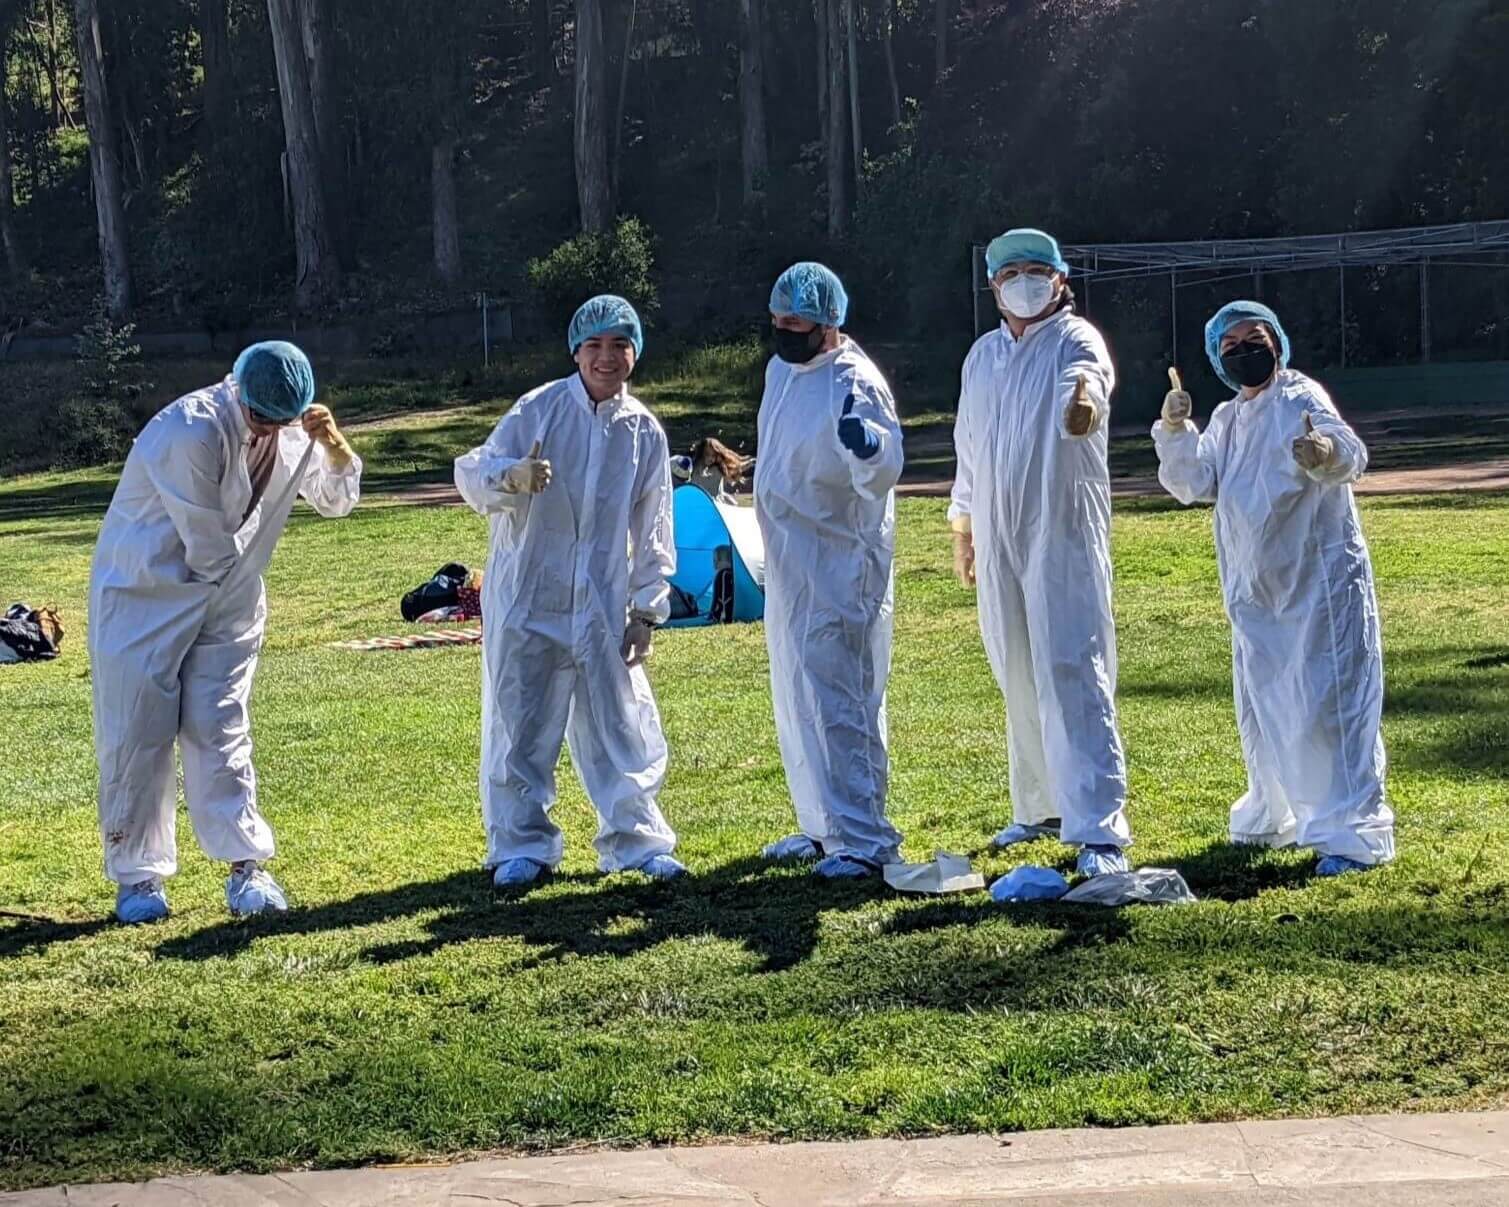 5 students participate in a contest on speed-dressing in lab gear at an event